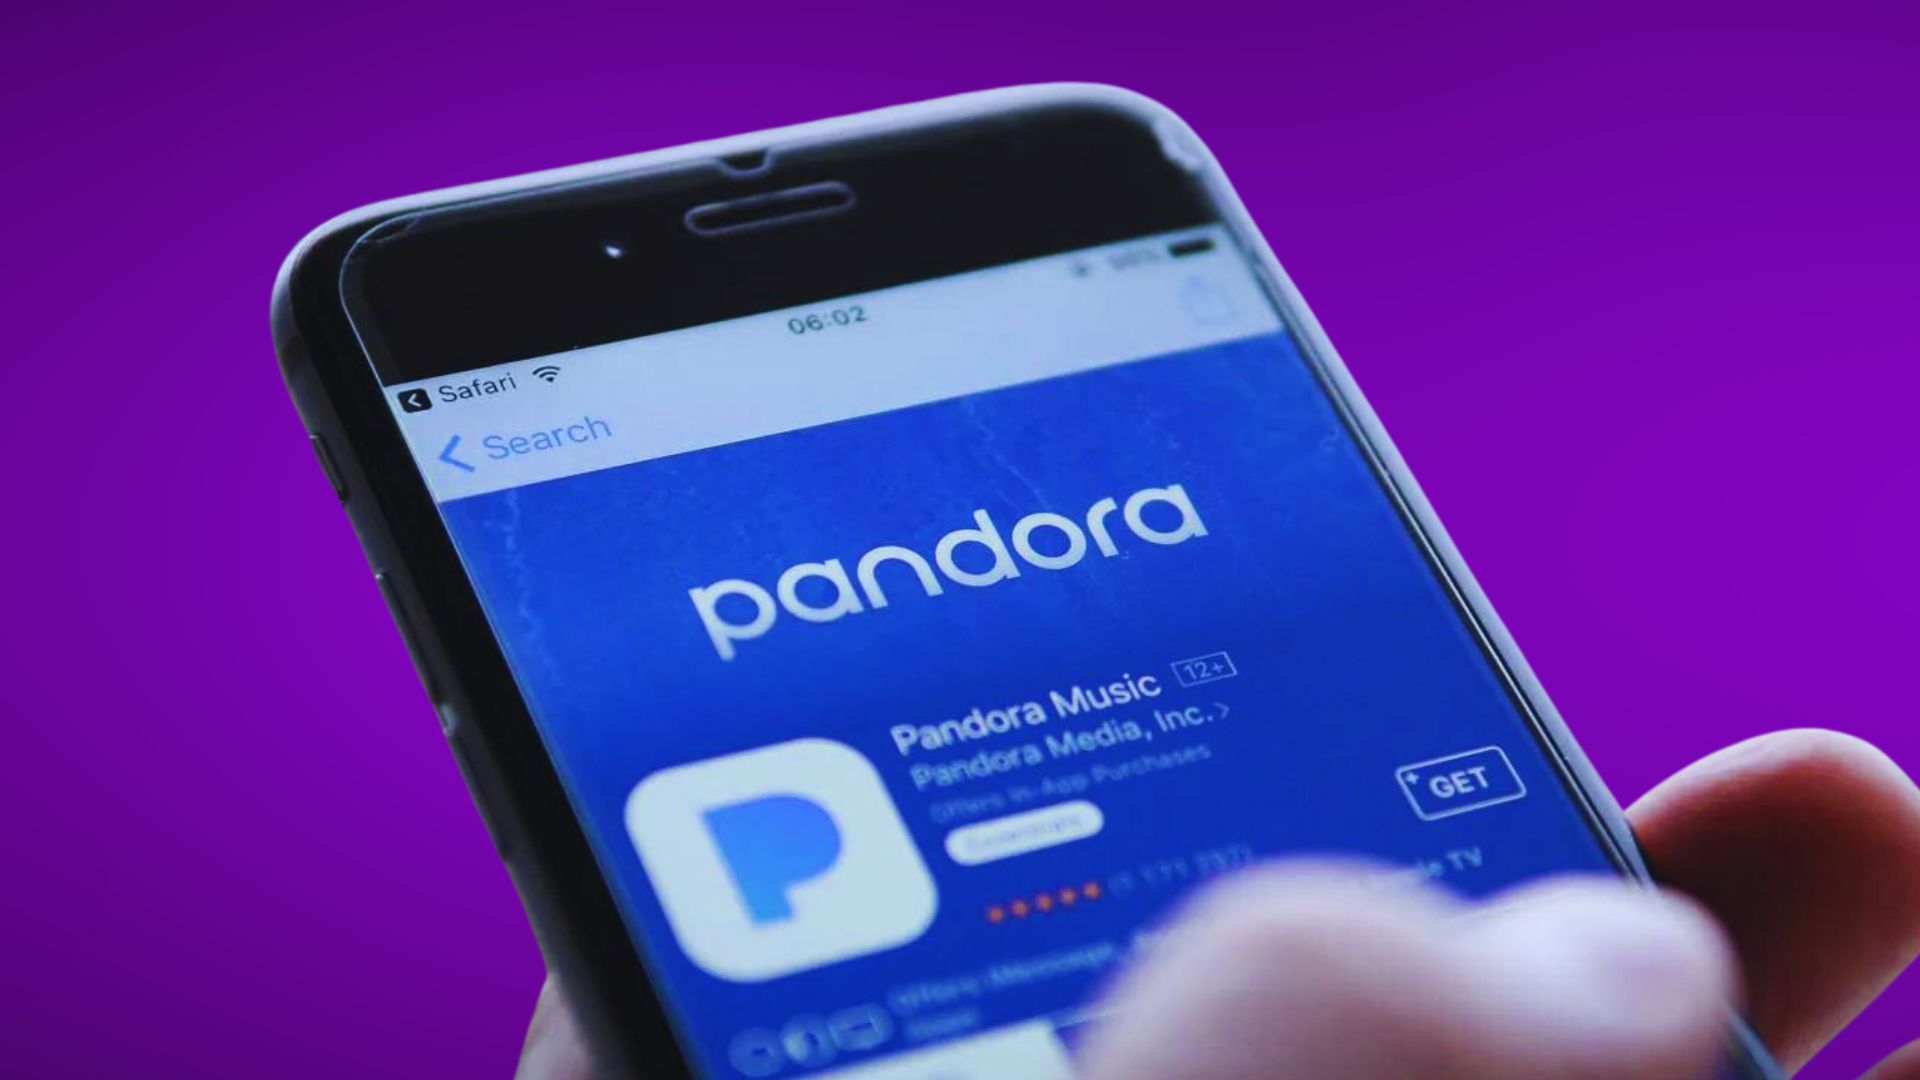 How to Fix Pandora not Playing on iPhone [Troubleshooting Guide]